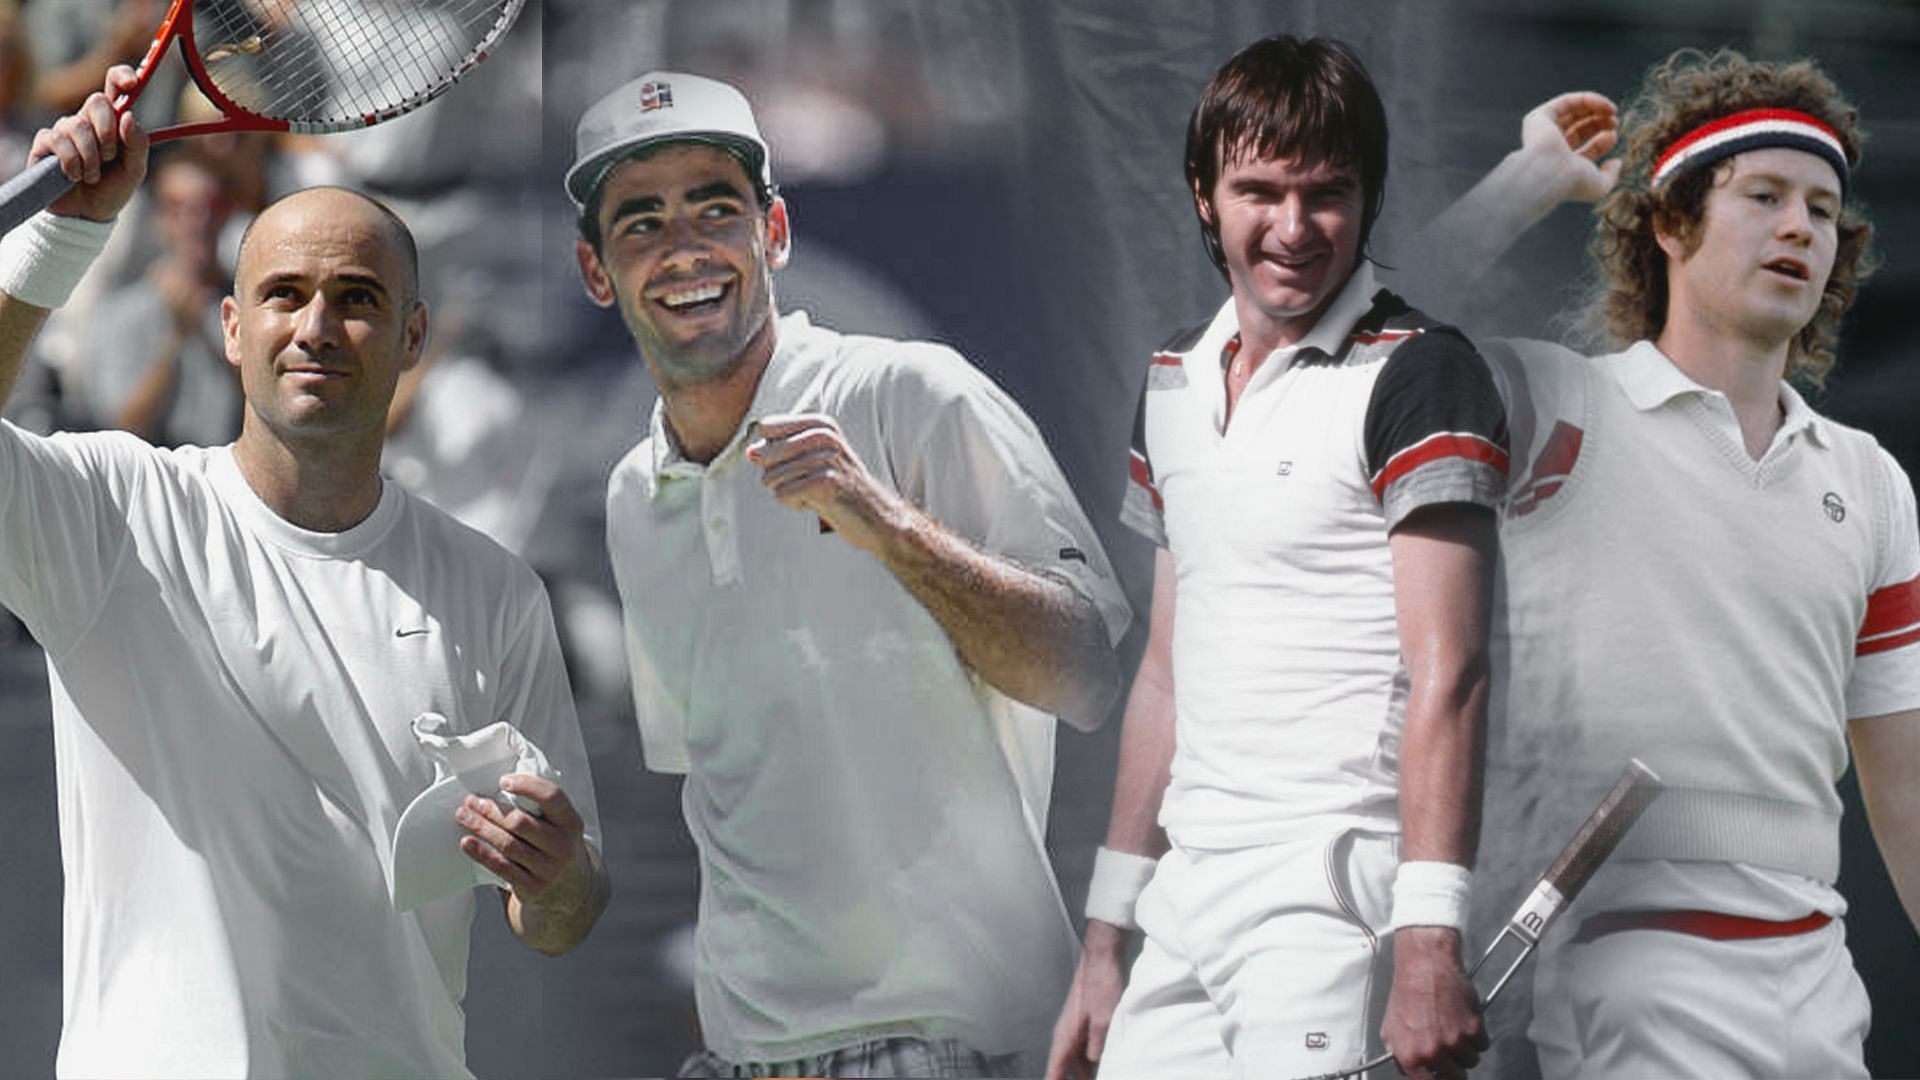 There were some superstars in tennis prior to the Big Three era